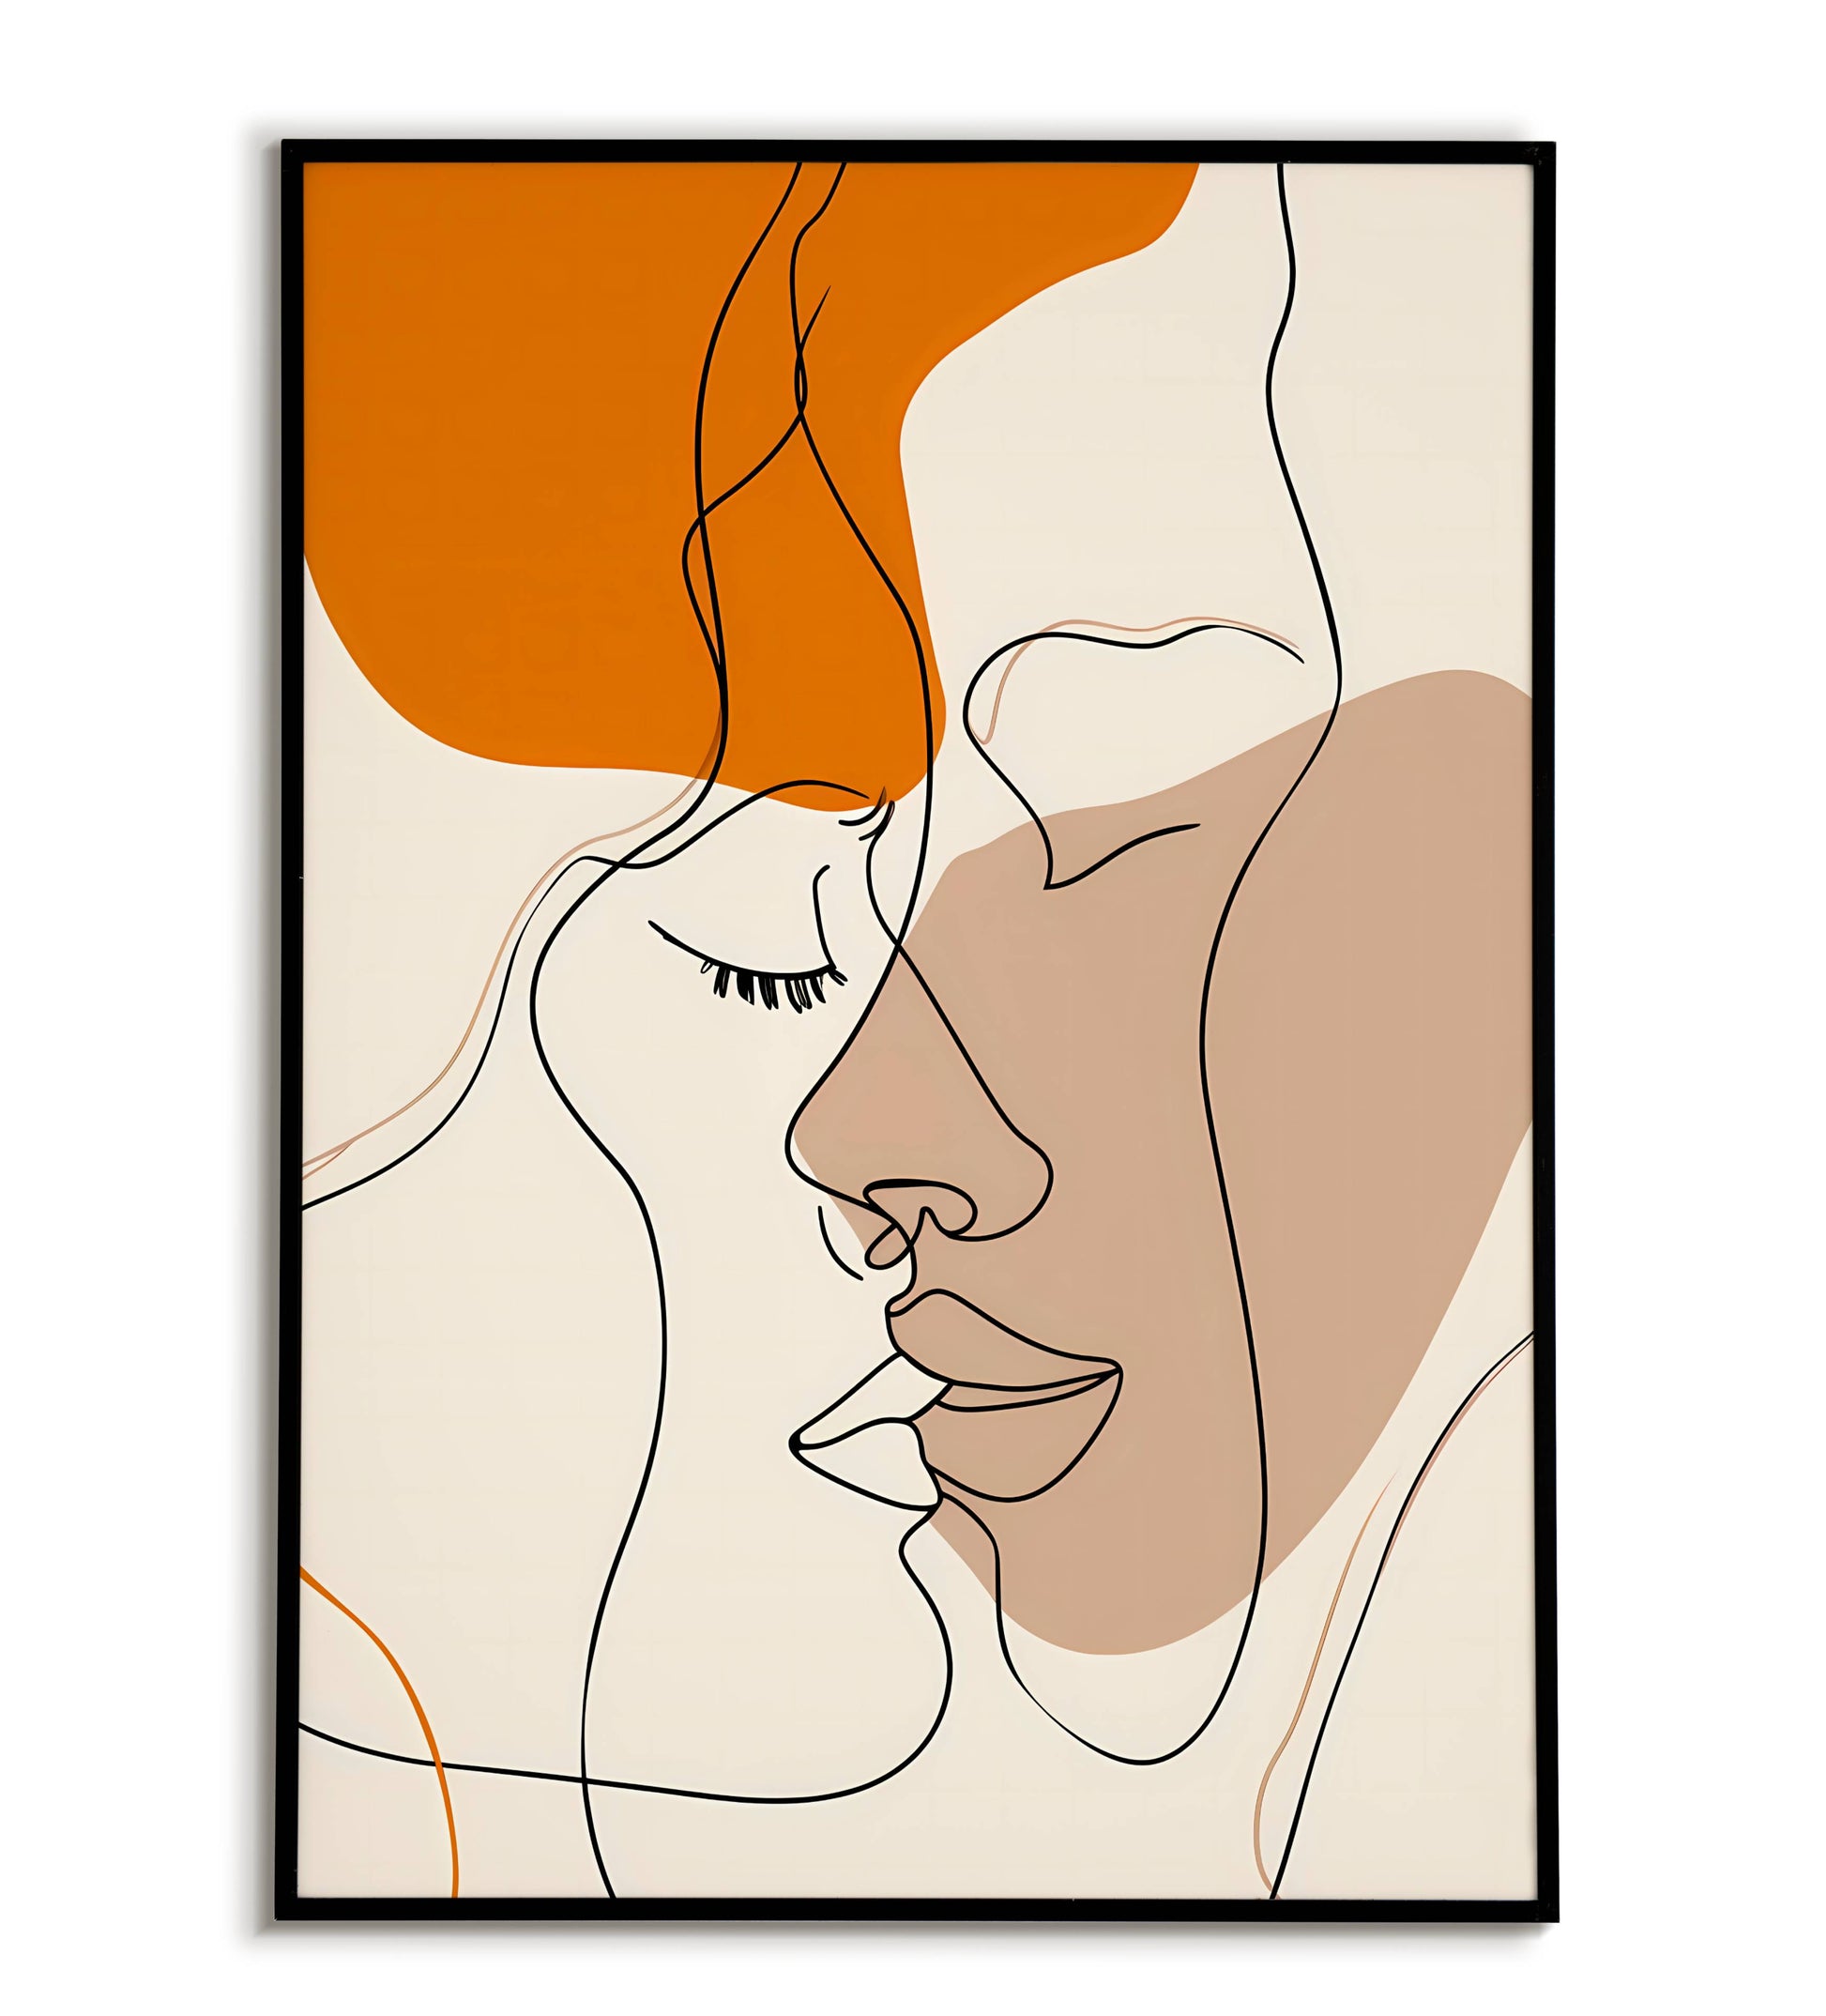 Couple Line Art - Printable Wall Art / Poster. Download this elegant design to celebrate love in a simple yet beautiful way.